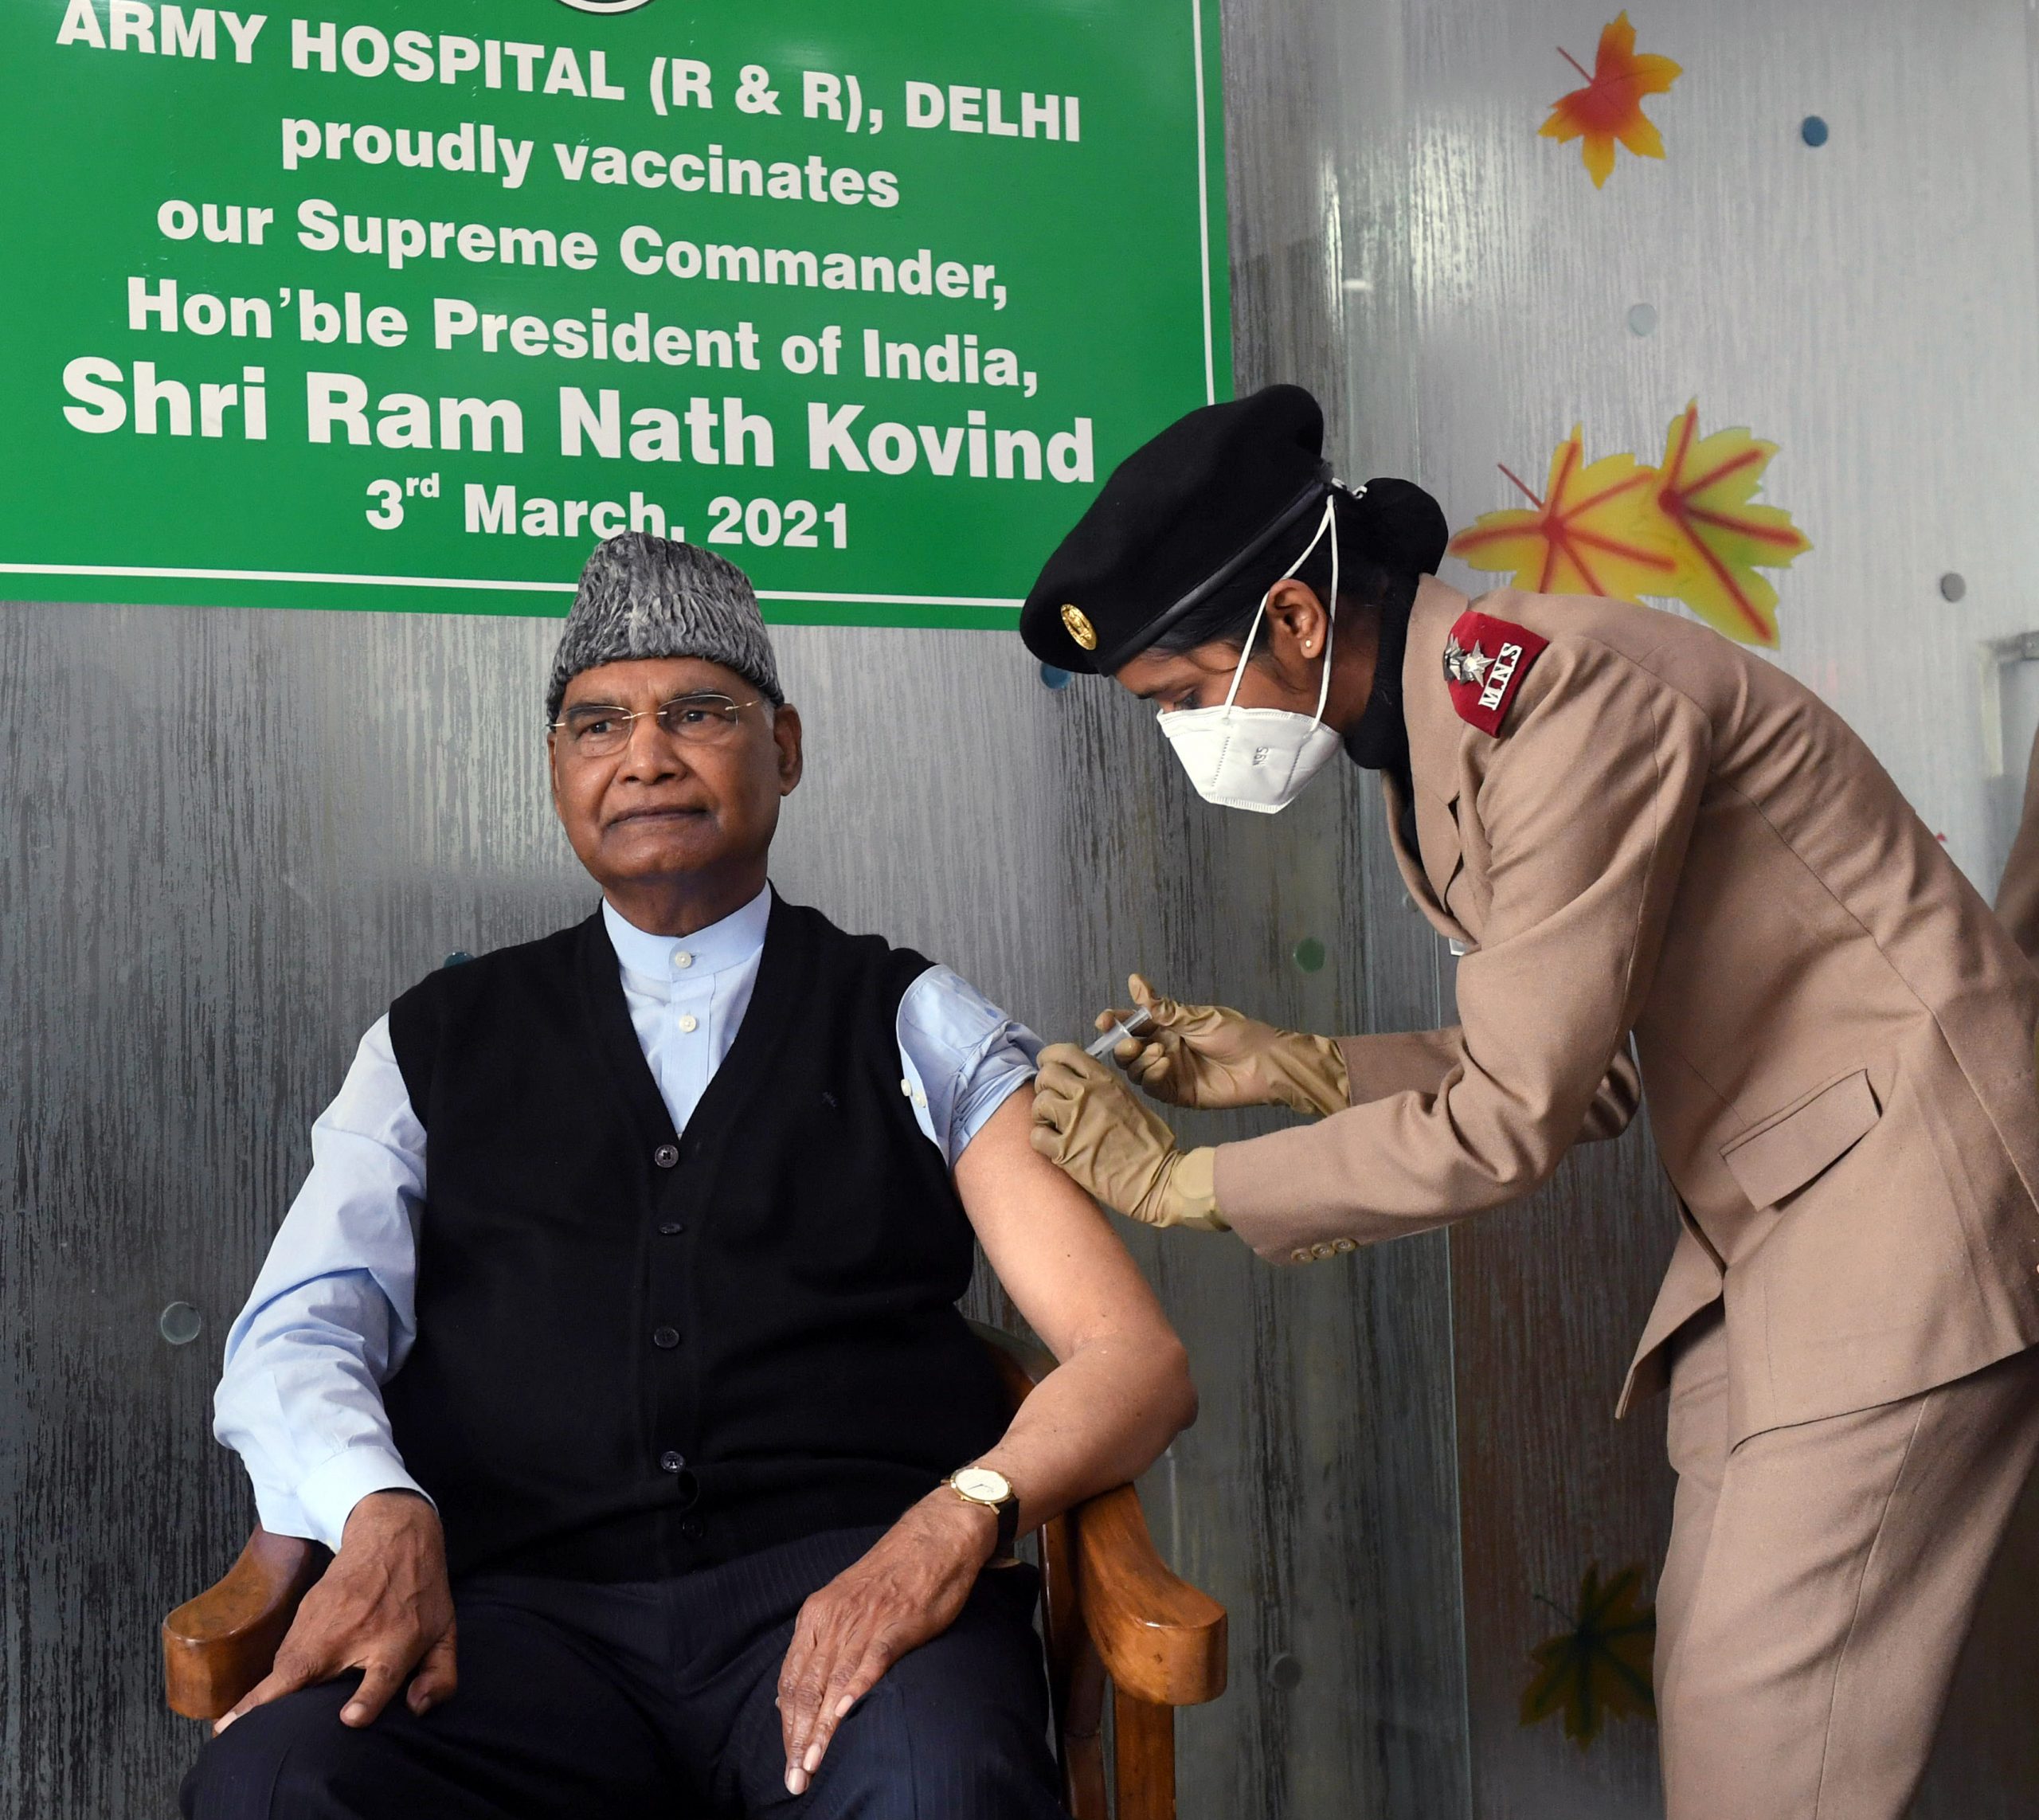 President Kovind receives first dose Of COVID-19 vaccine at Army Hospital in Delhi